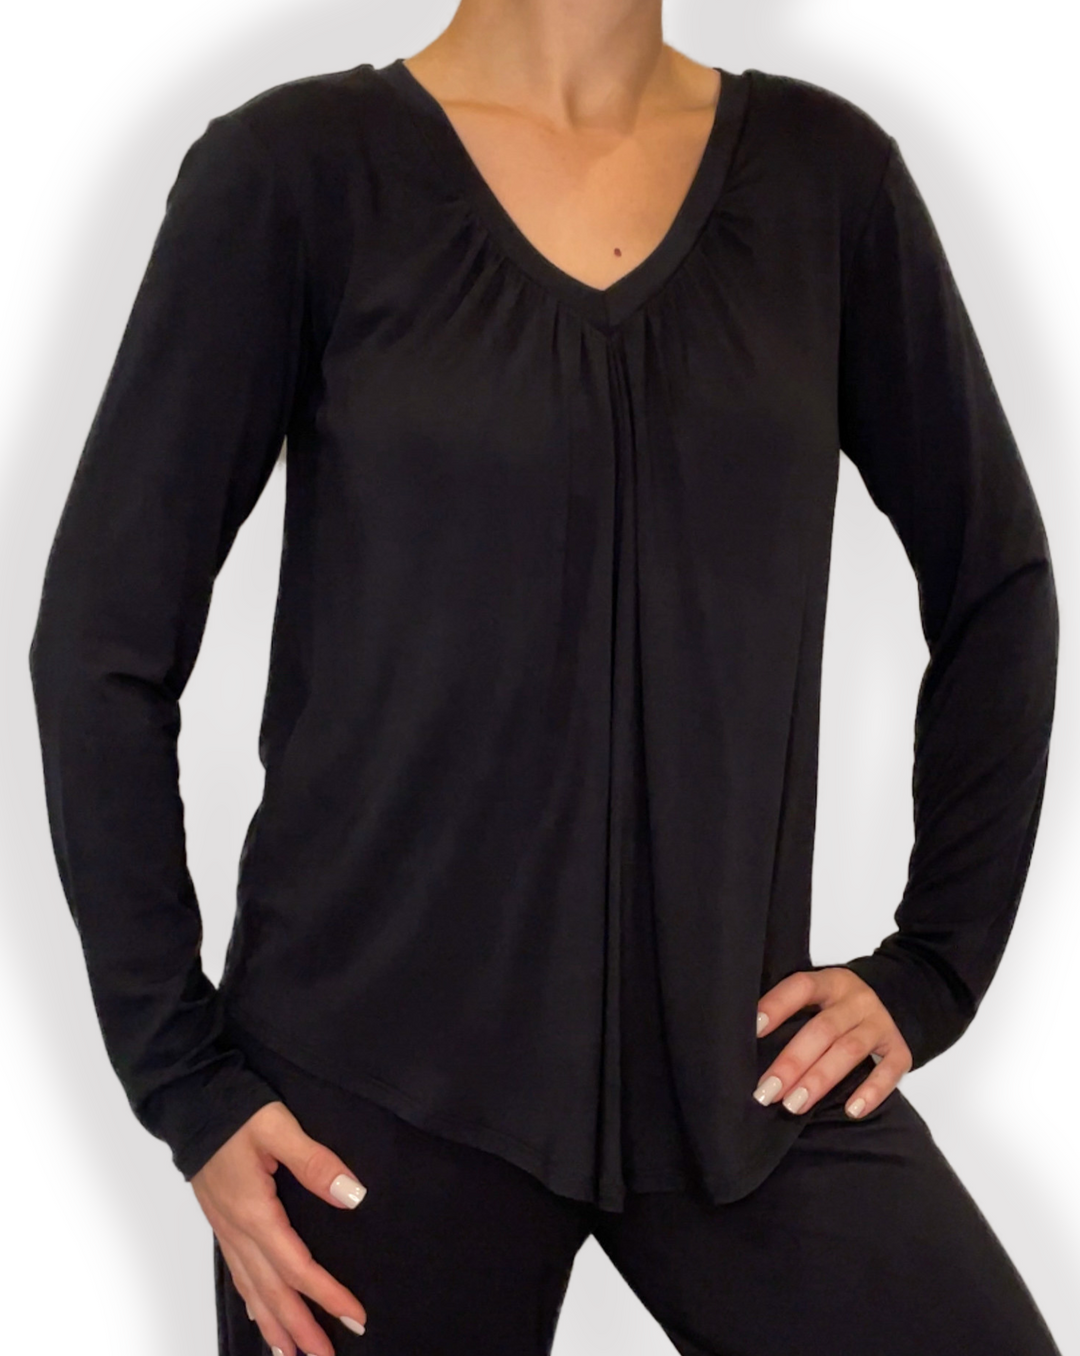 Collection DARCI of Bamboo Long Sleeve Tops in black color 